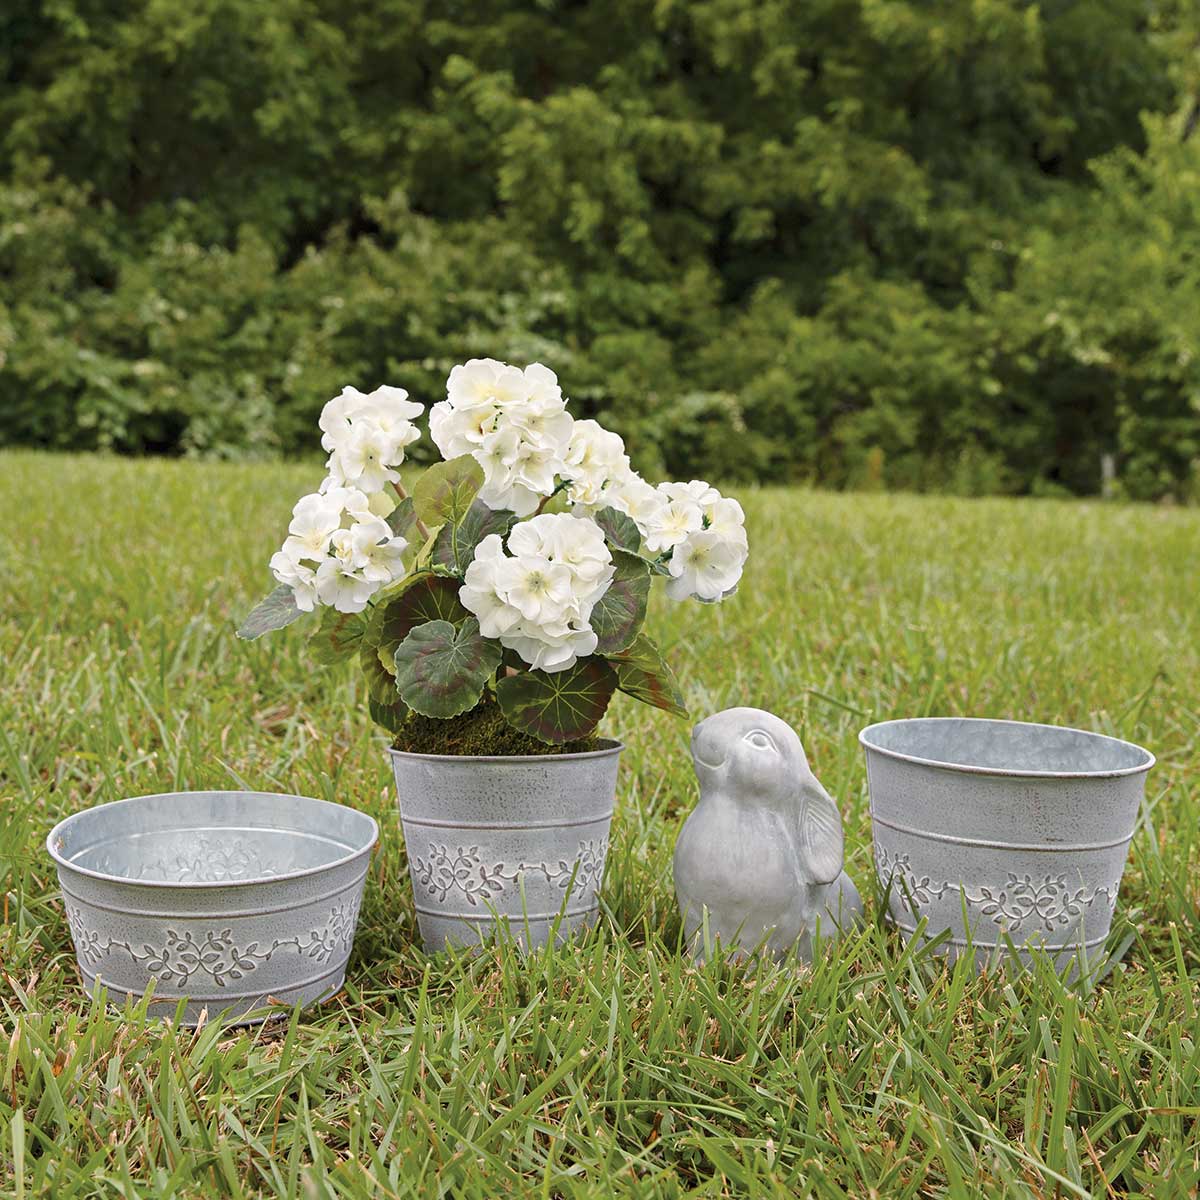 BUCKET PRIVET GREY BOWL 7.75IN X 3.75IN METAL - Click Image to Close